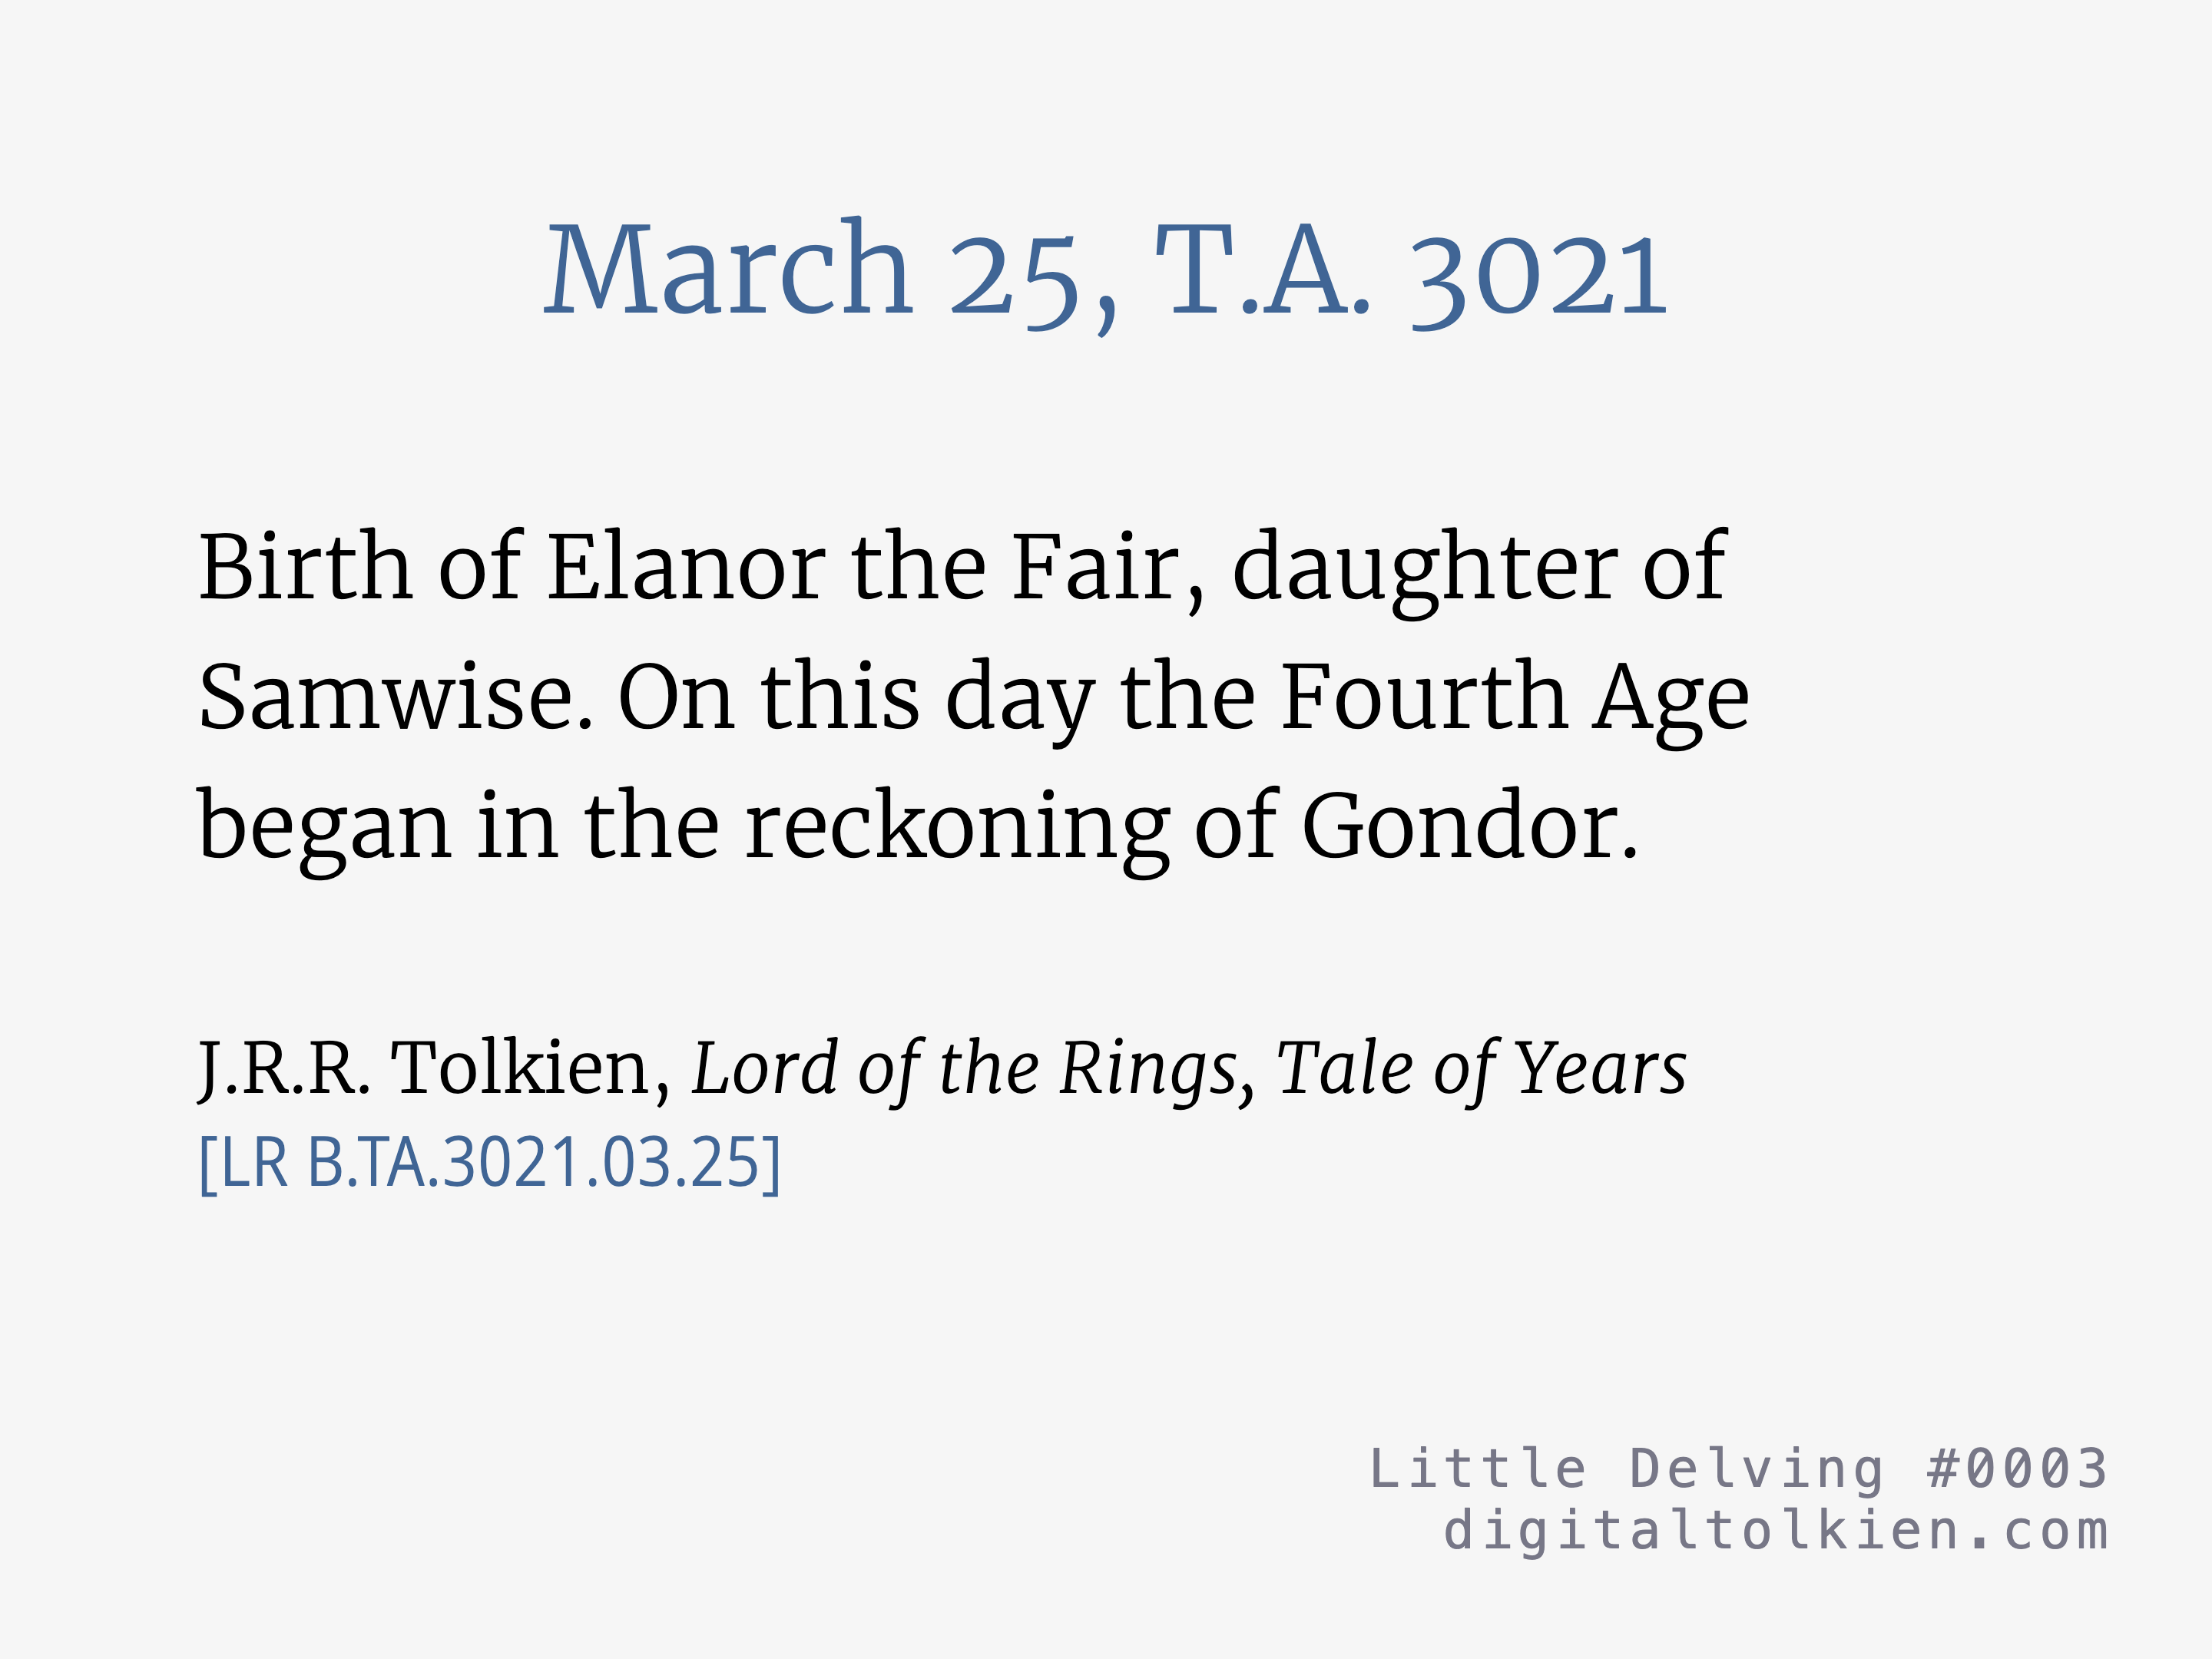 March 25, T.A. 3021
        Birth of Elanor the Fair, daughter of Samwise. On this day the Fourth Age began in the reckoning of Gondor.
        J.R.R. Tolkien, Lord of the Rings, Tale of Years
        [LR B.TA.3021.03.25]
        Little Delving #0003
        digitaltolkien.com